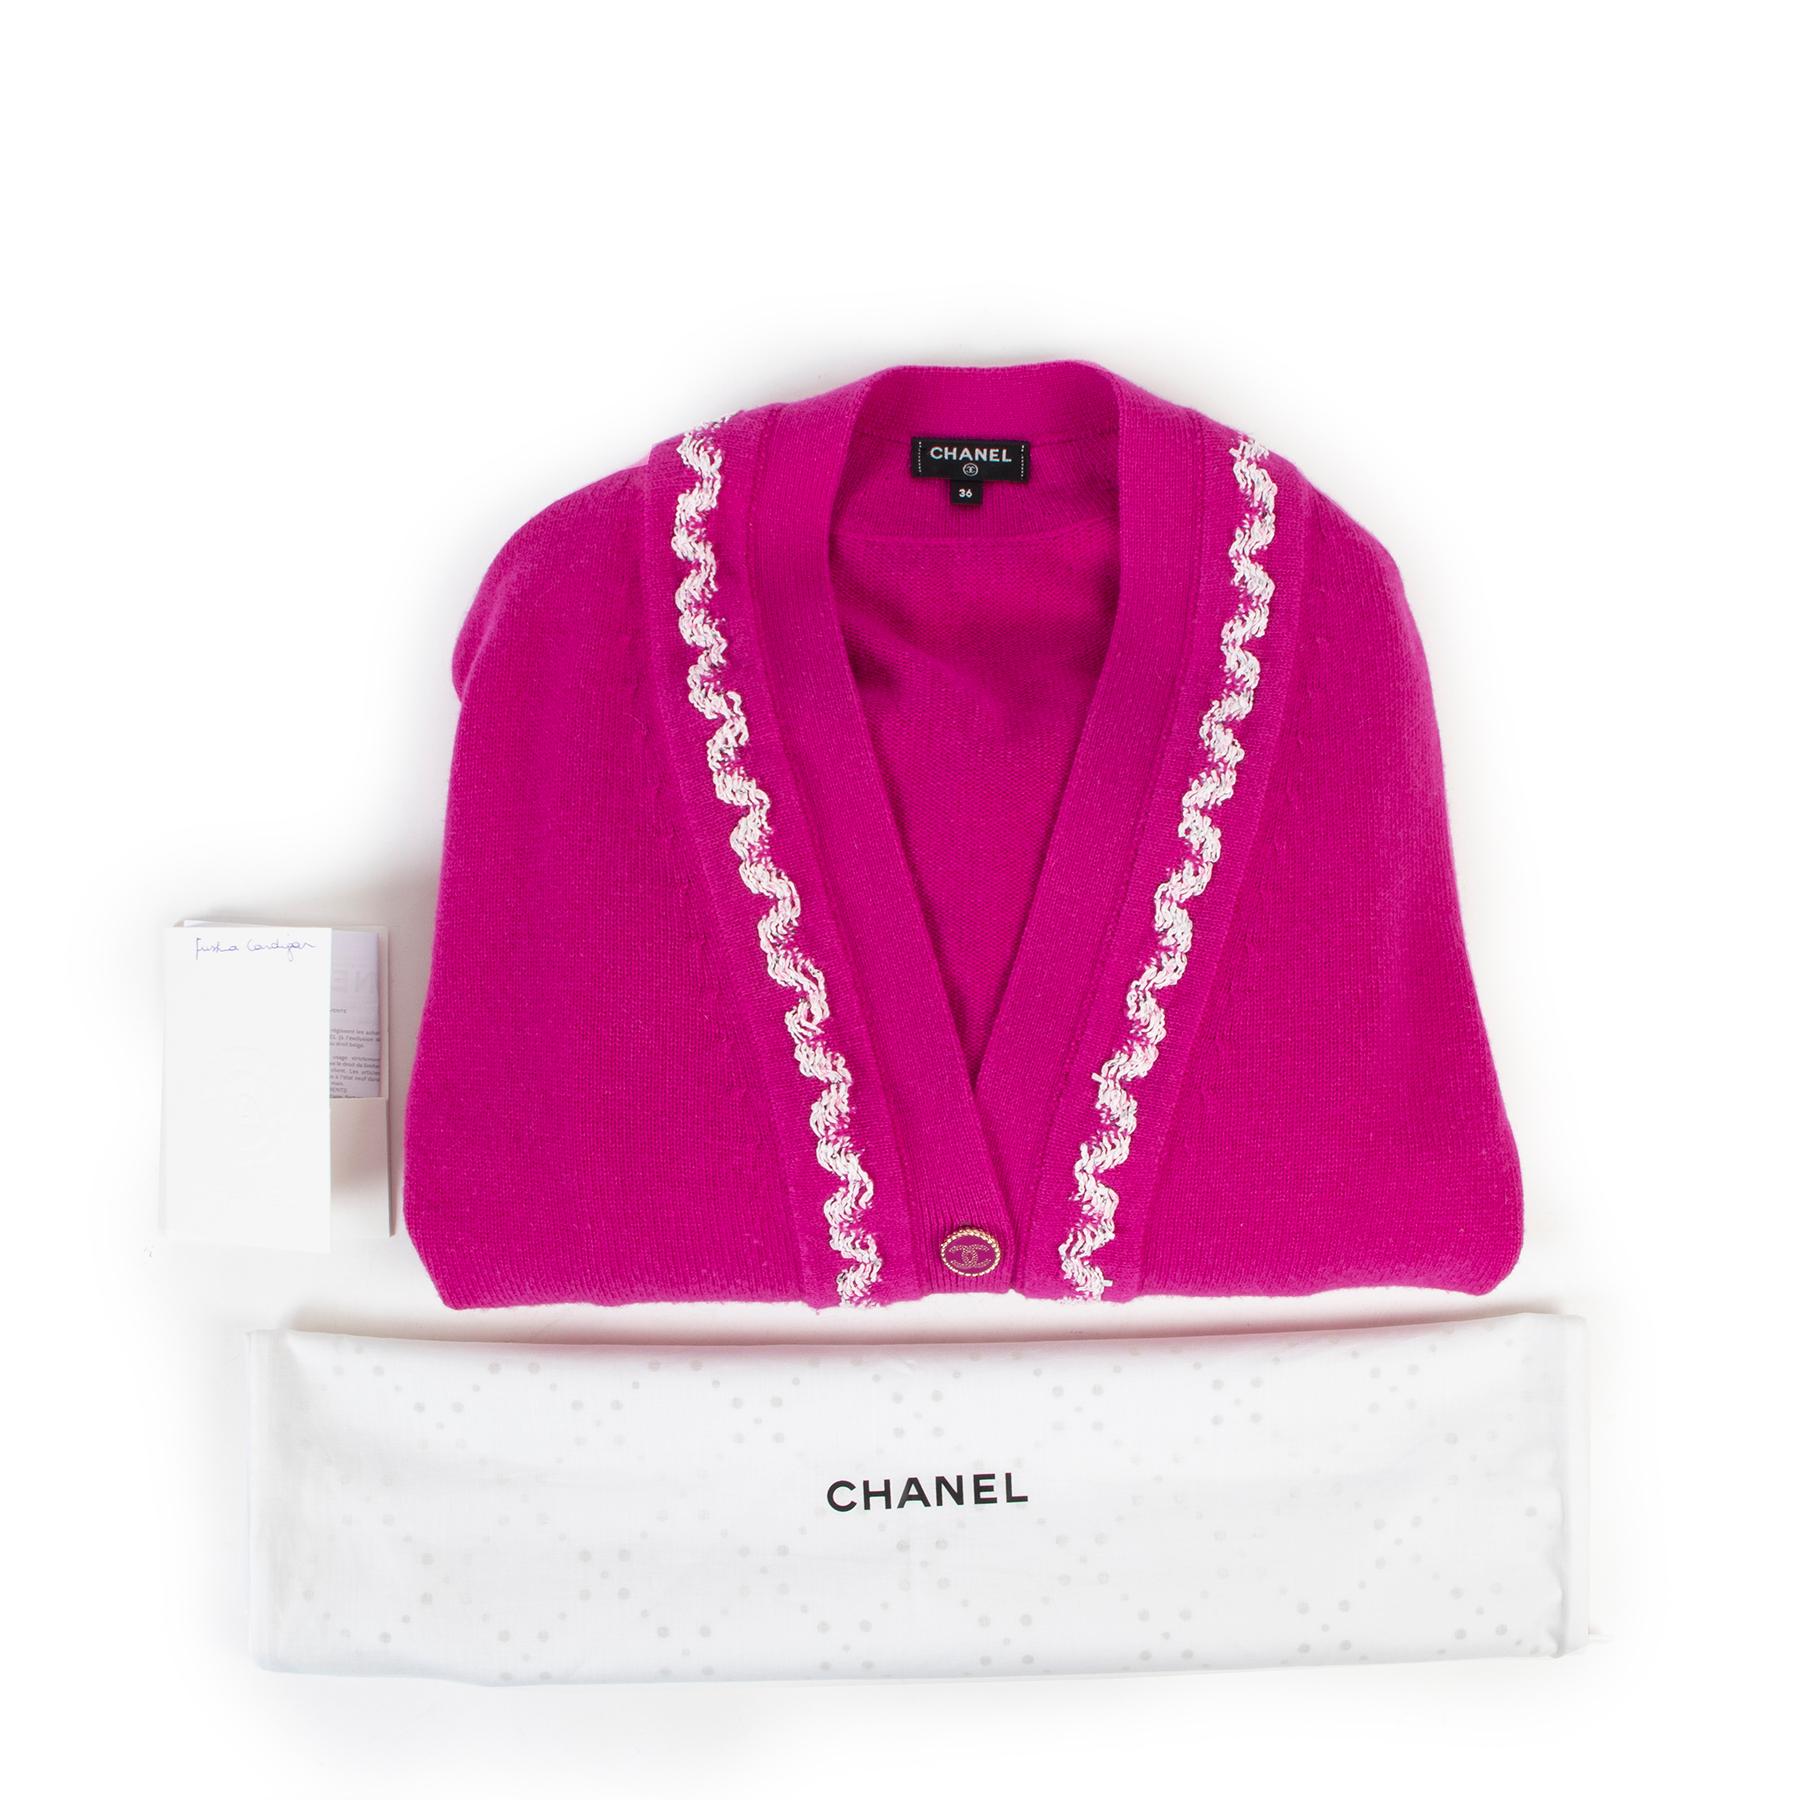 Chanel Fuchsia Spring 2021 Cashmere Cardigan - Size 36

Seen on K-pop star G-Dragon, this iconic fuchsia pink cardigan from Chanel is made from 100% luxuriously soft cashmere, adorned with white tread trimming and jewel-like buttons.

Comes